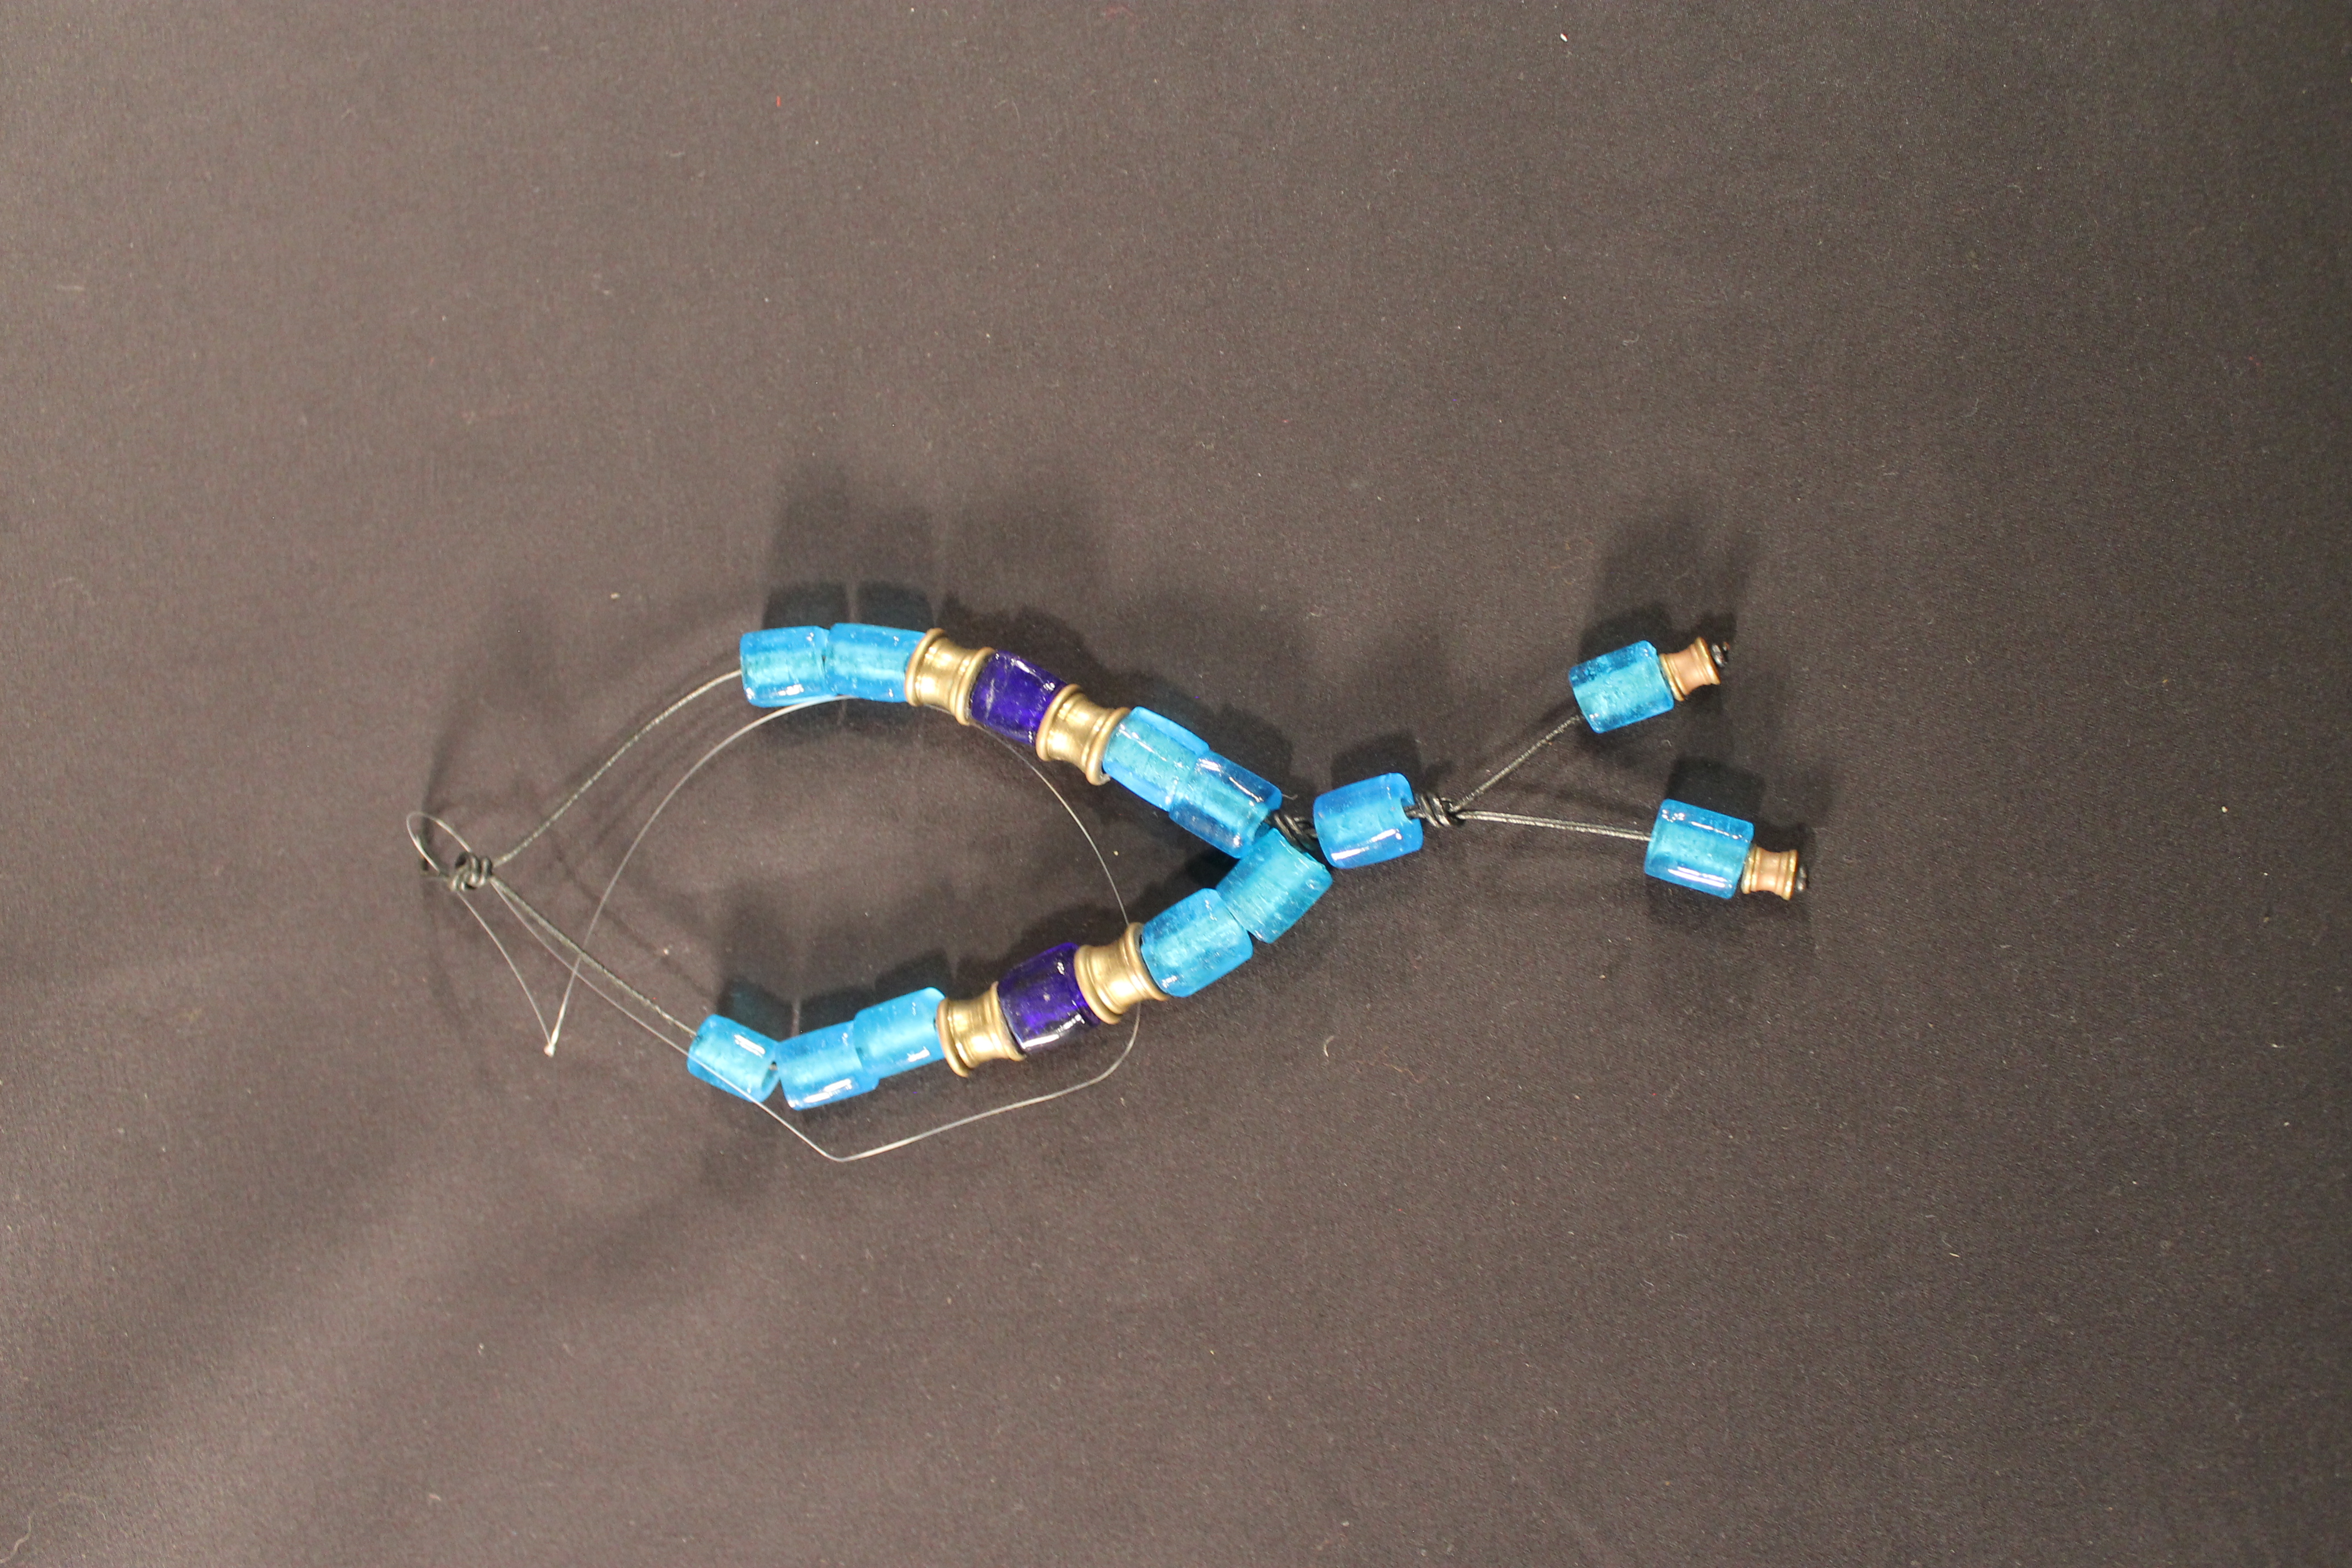 Transparent dark and light blue beads are attached to a black string with gold accent beads. 